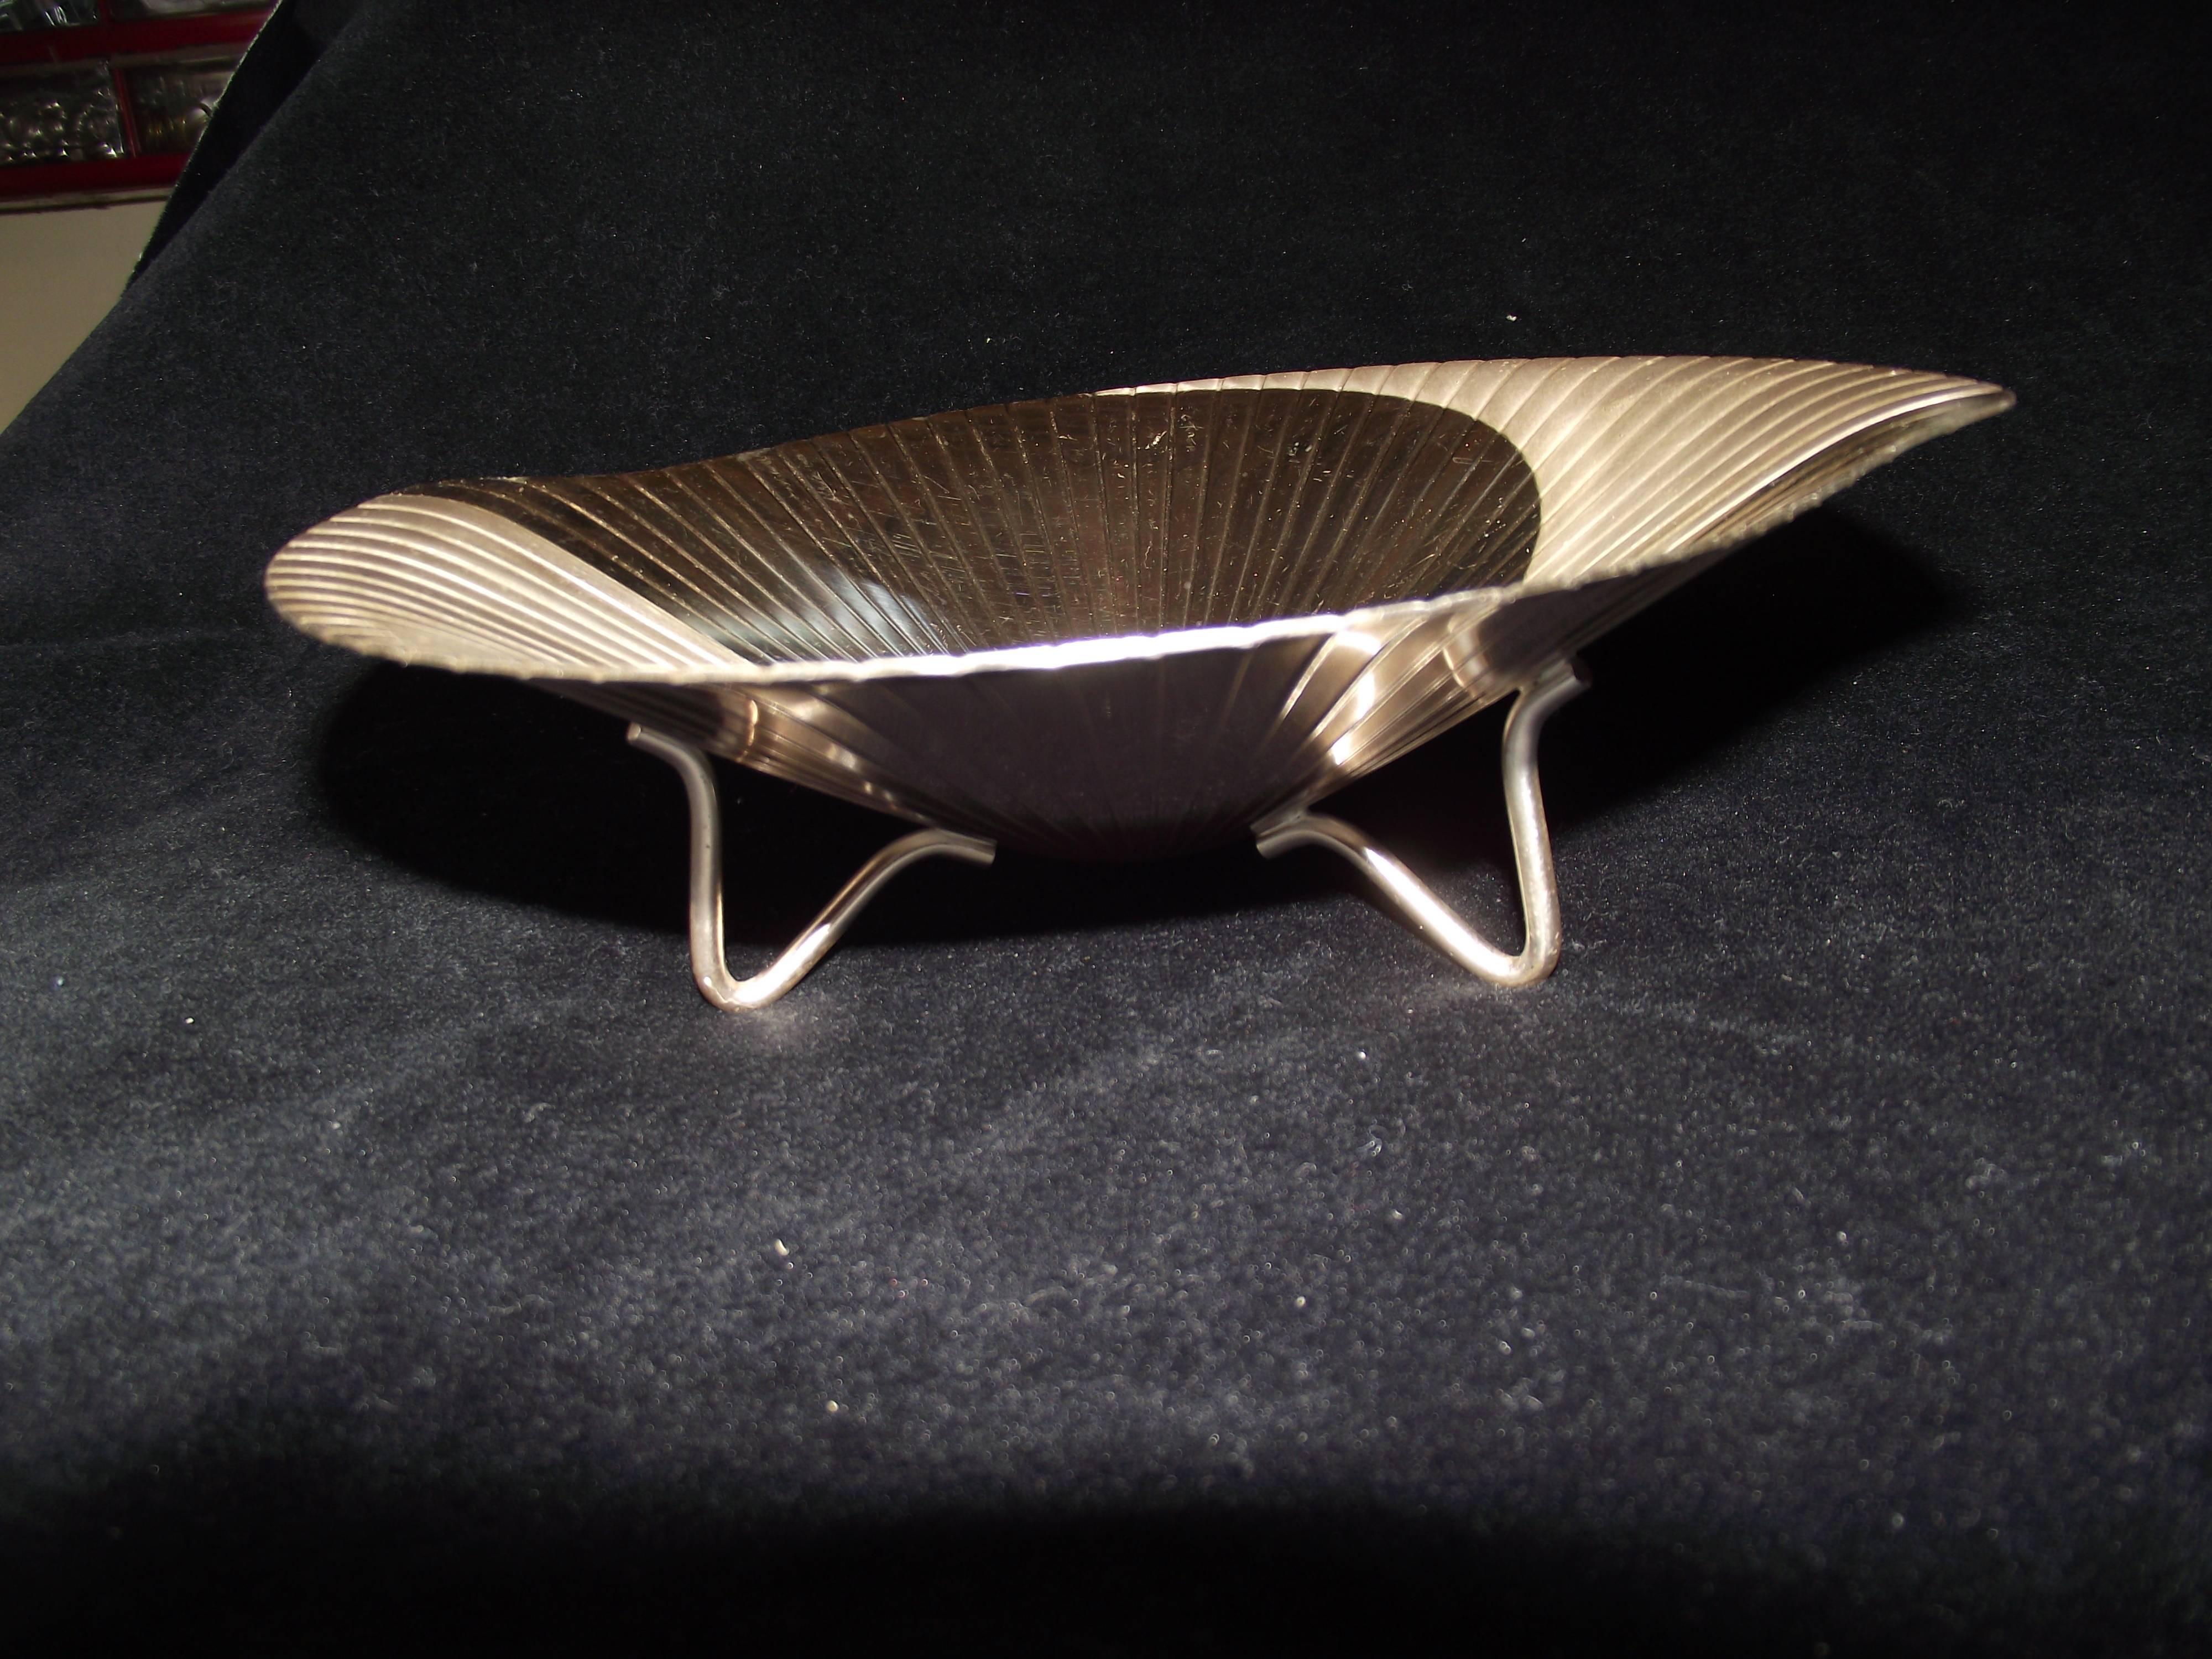 This flat and polished silver bowl is captivating!

Made in 1933 by WMF-Wurtembergishe Metallwarenfabrik it is more a work of art than a serving piece. In my home it would go on a plate stand on a shelf.